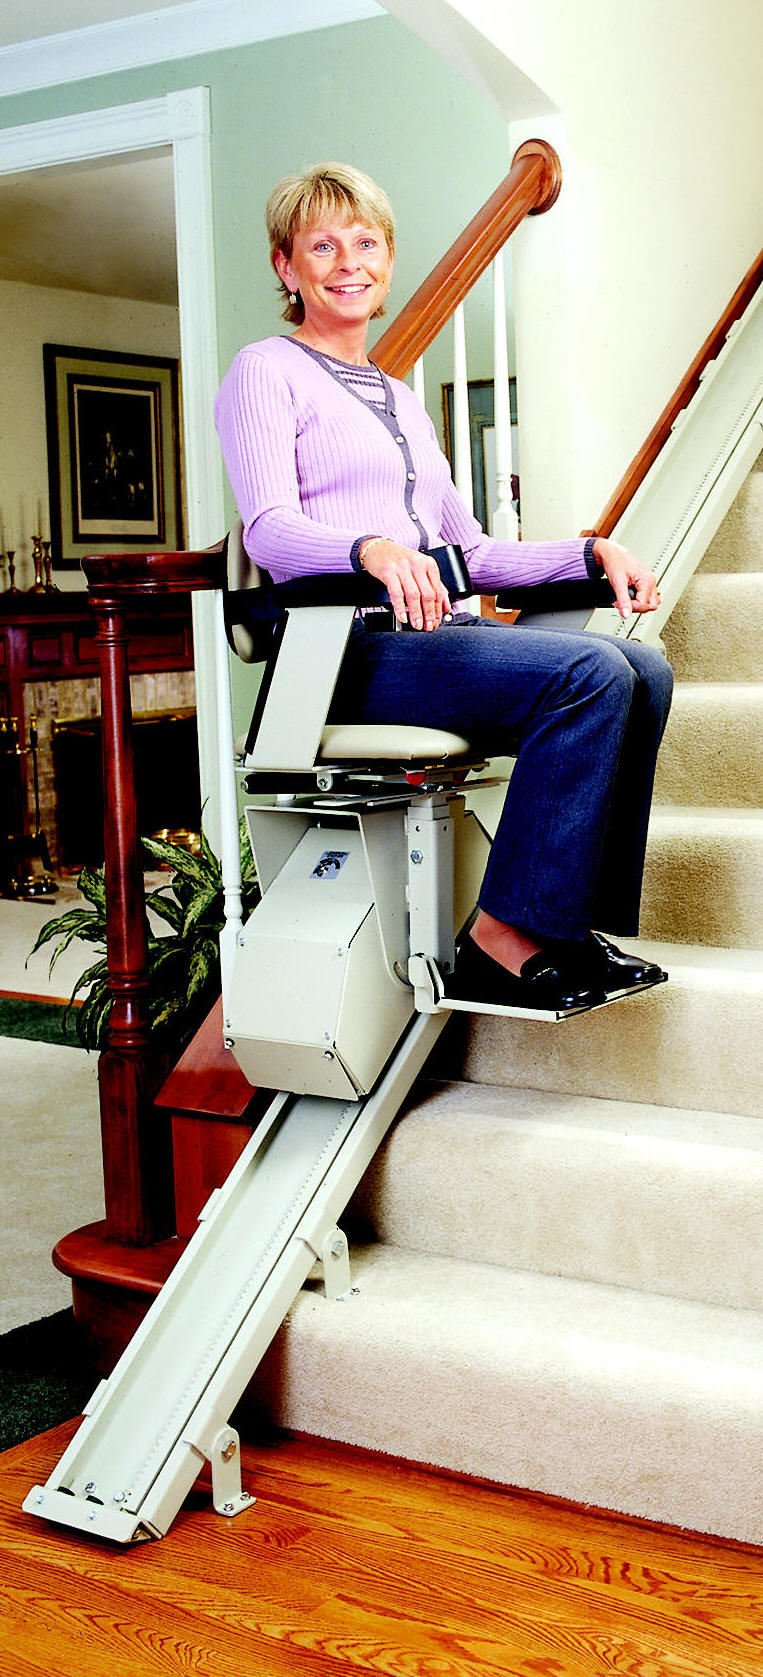 san diego ada commercial business are vpl vertical platform wheelchair elevator lifts